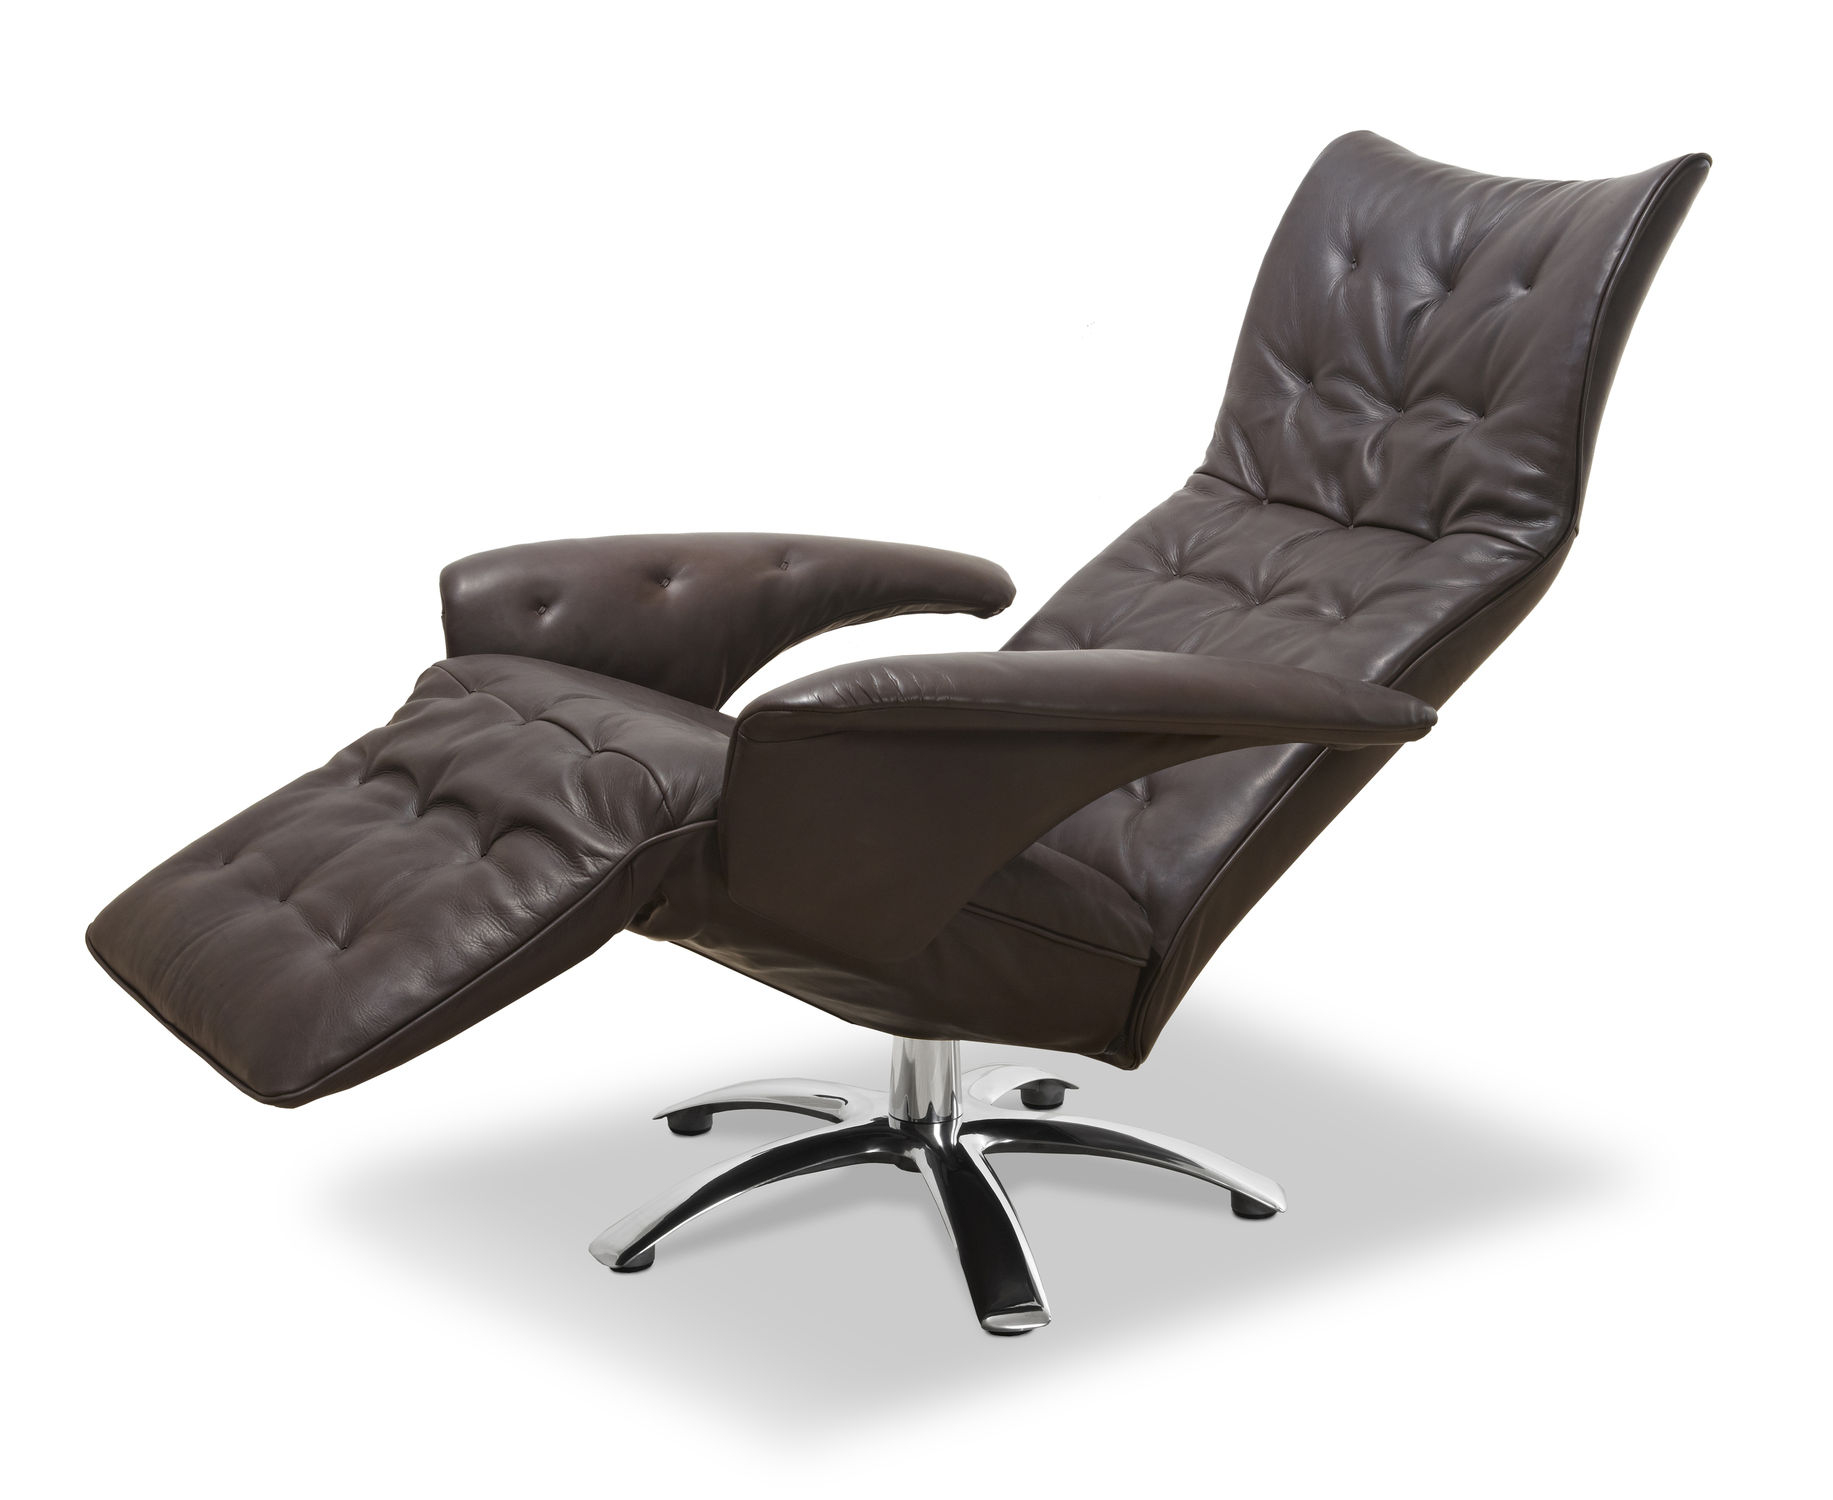 Recliners For Small Spaces Visualhunt, Modern Leather Recliner Chair Uk